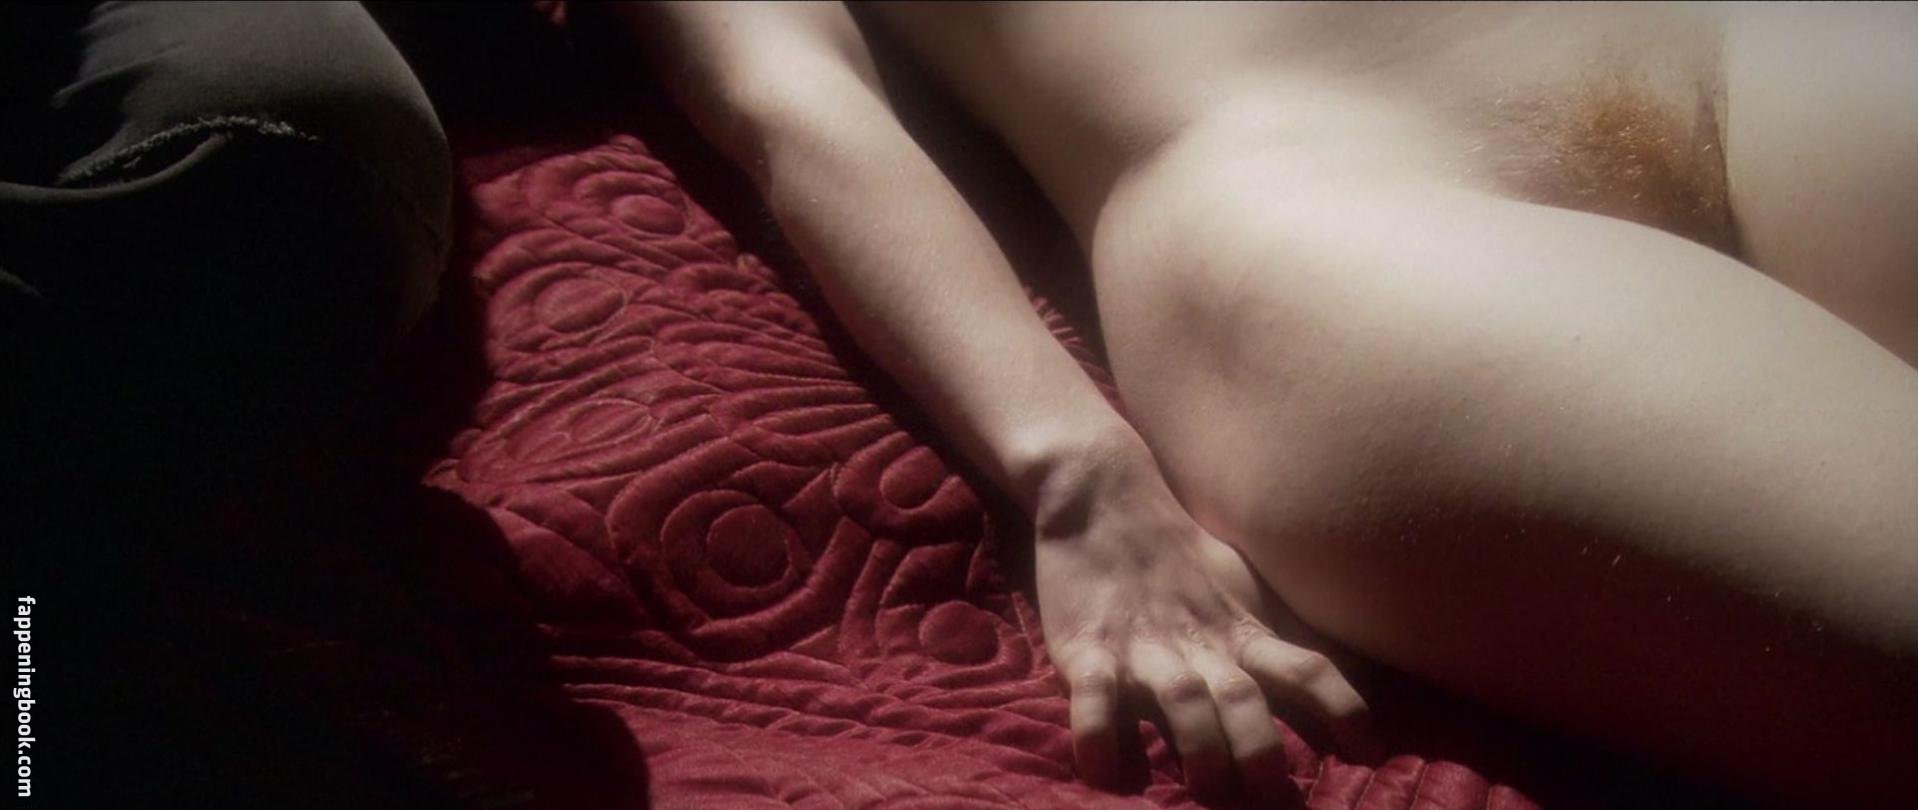 Bryce Dallas Howard Nude, The Fappening - Photo #91780 - FappeningBook.